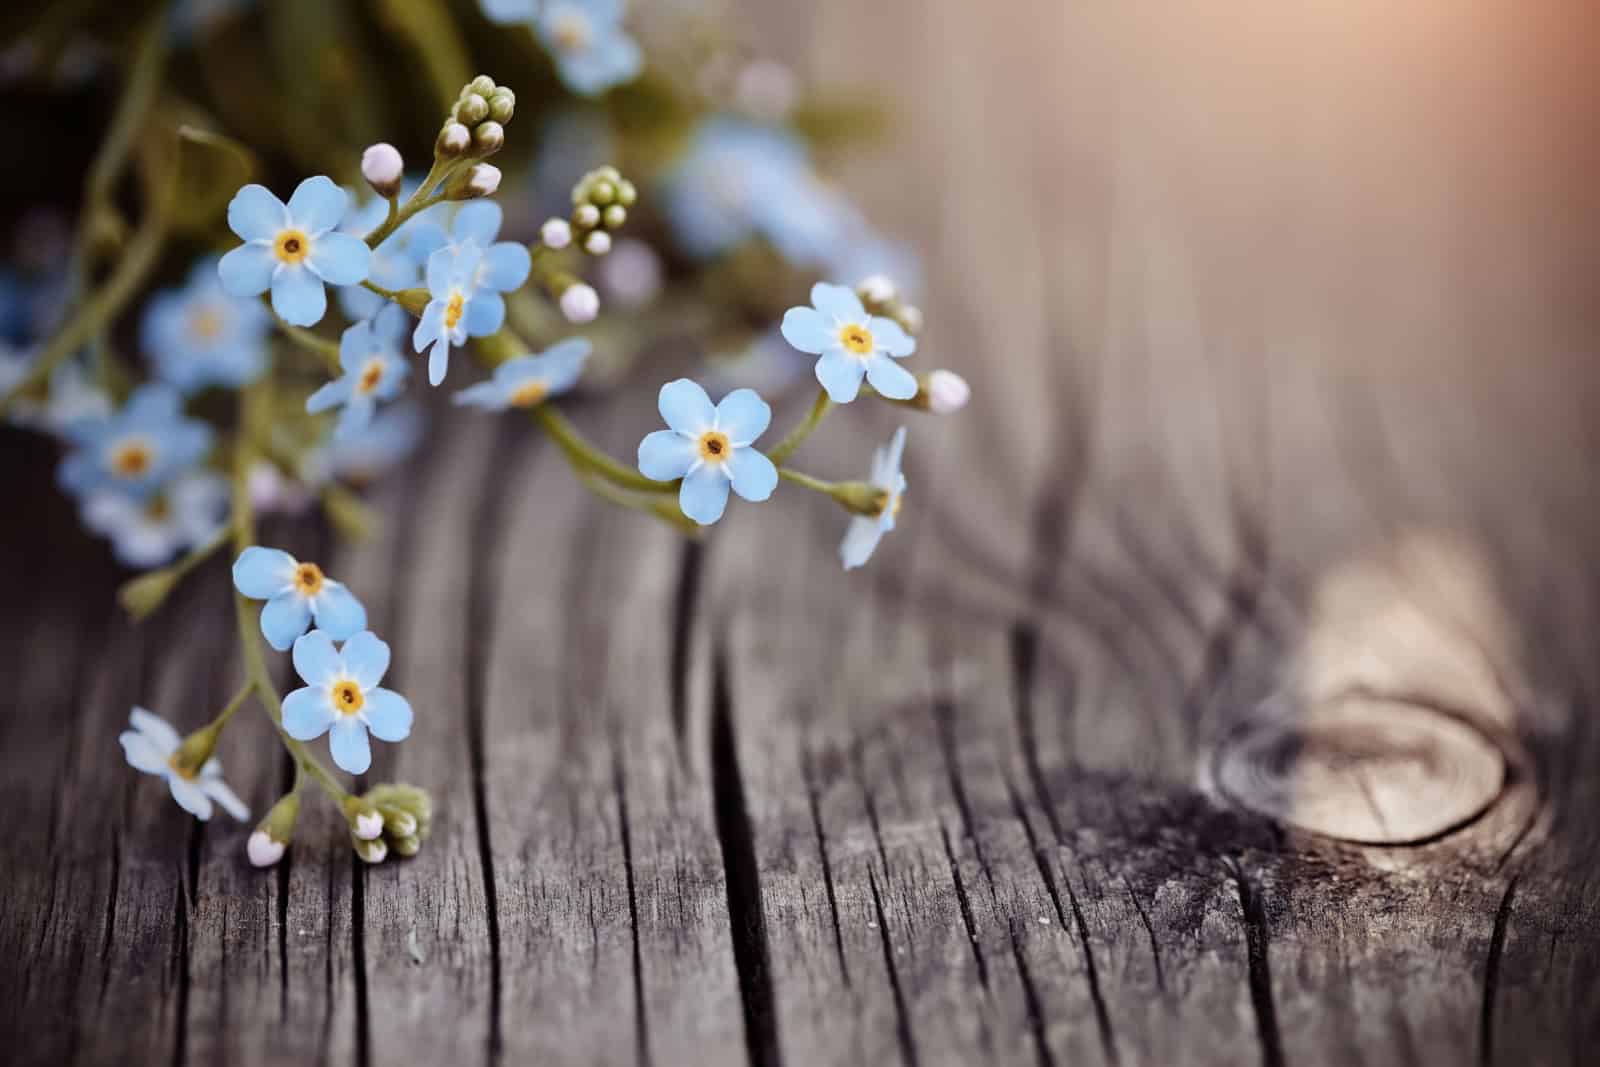 Blue forget-me-nots lie on a wooden table